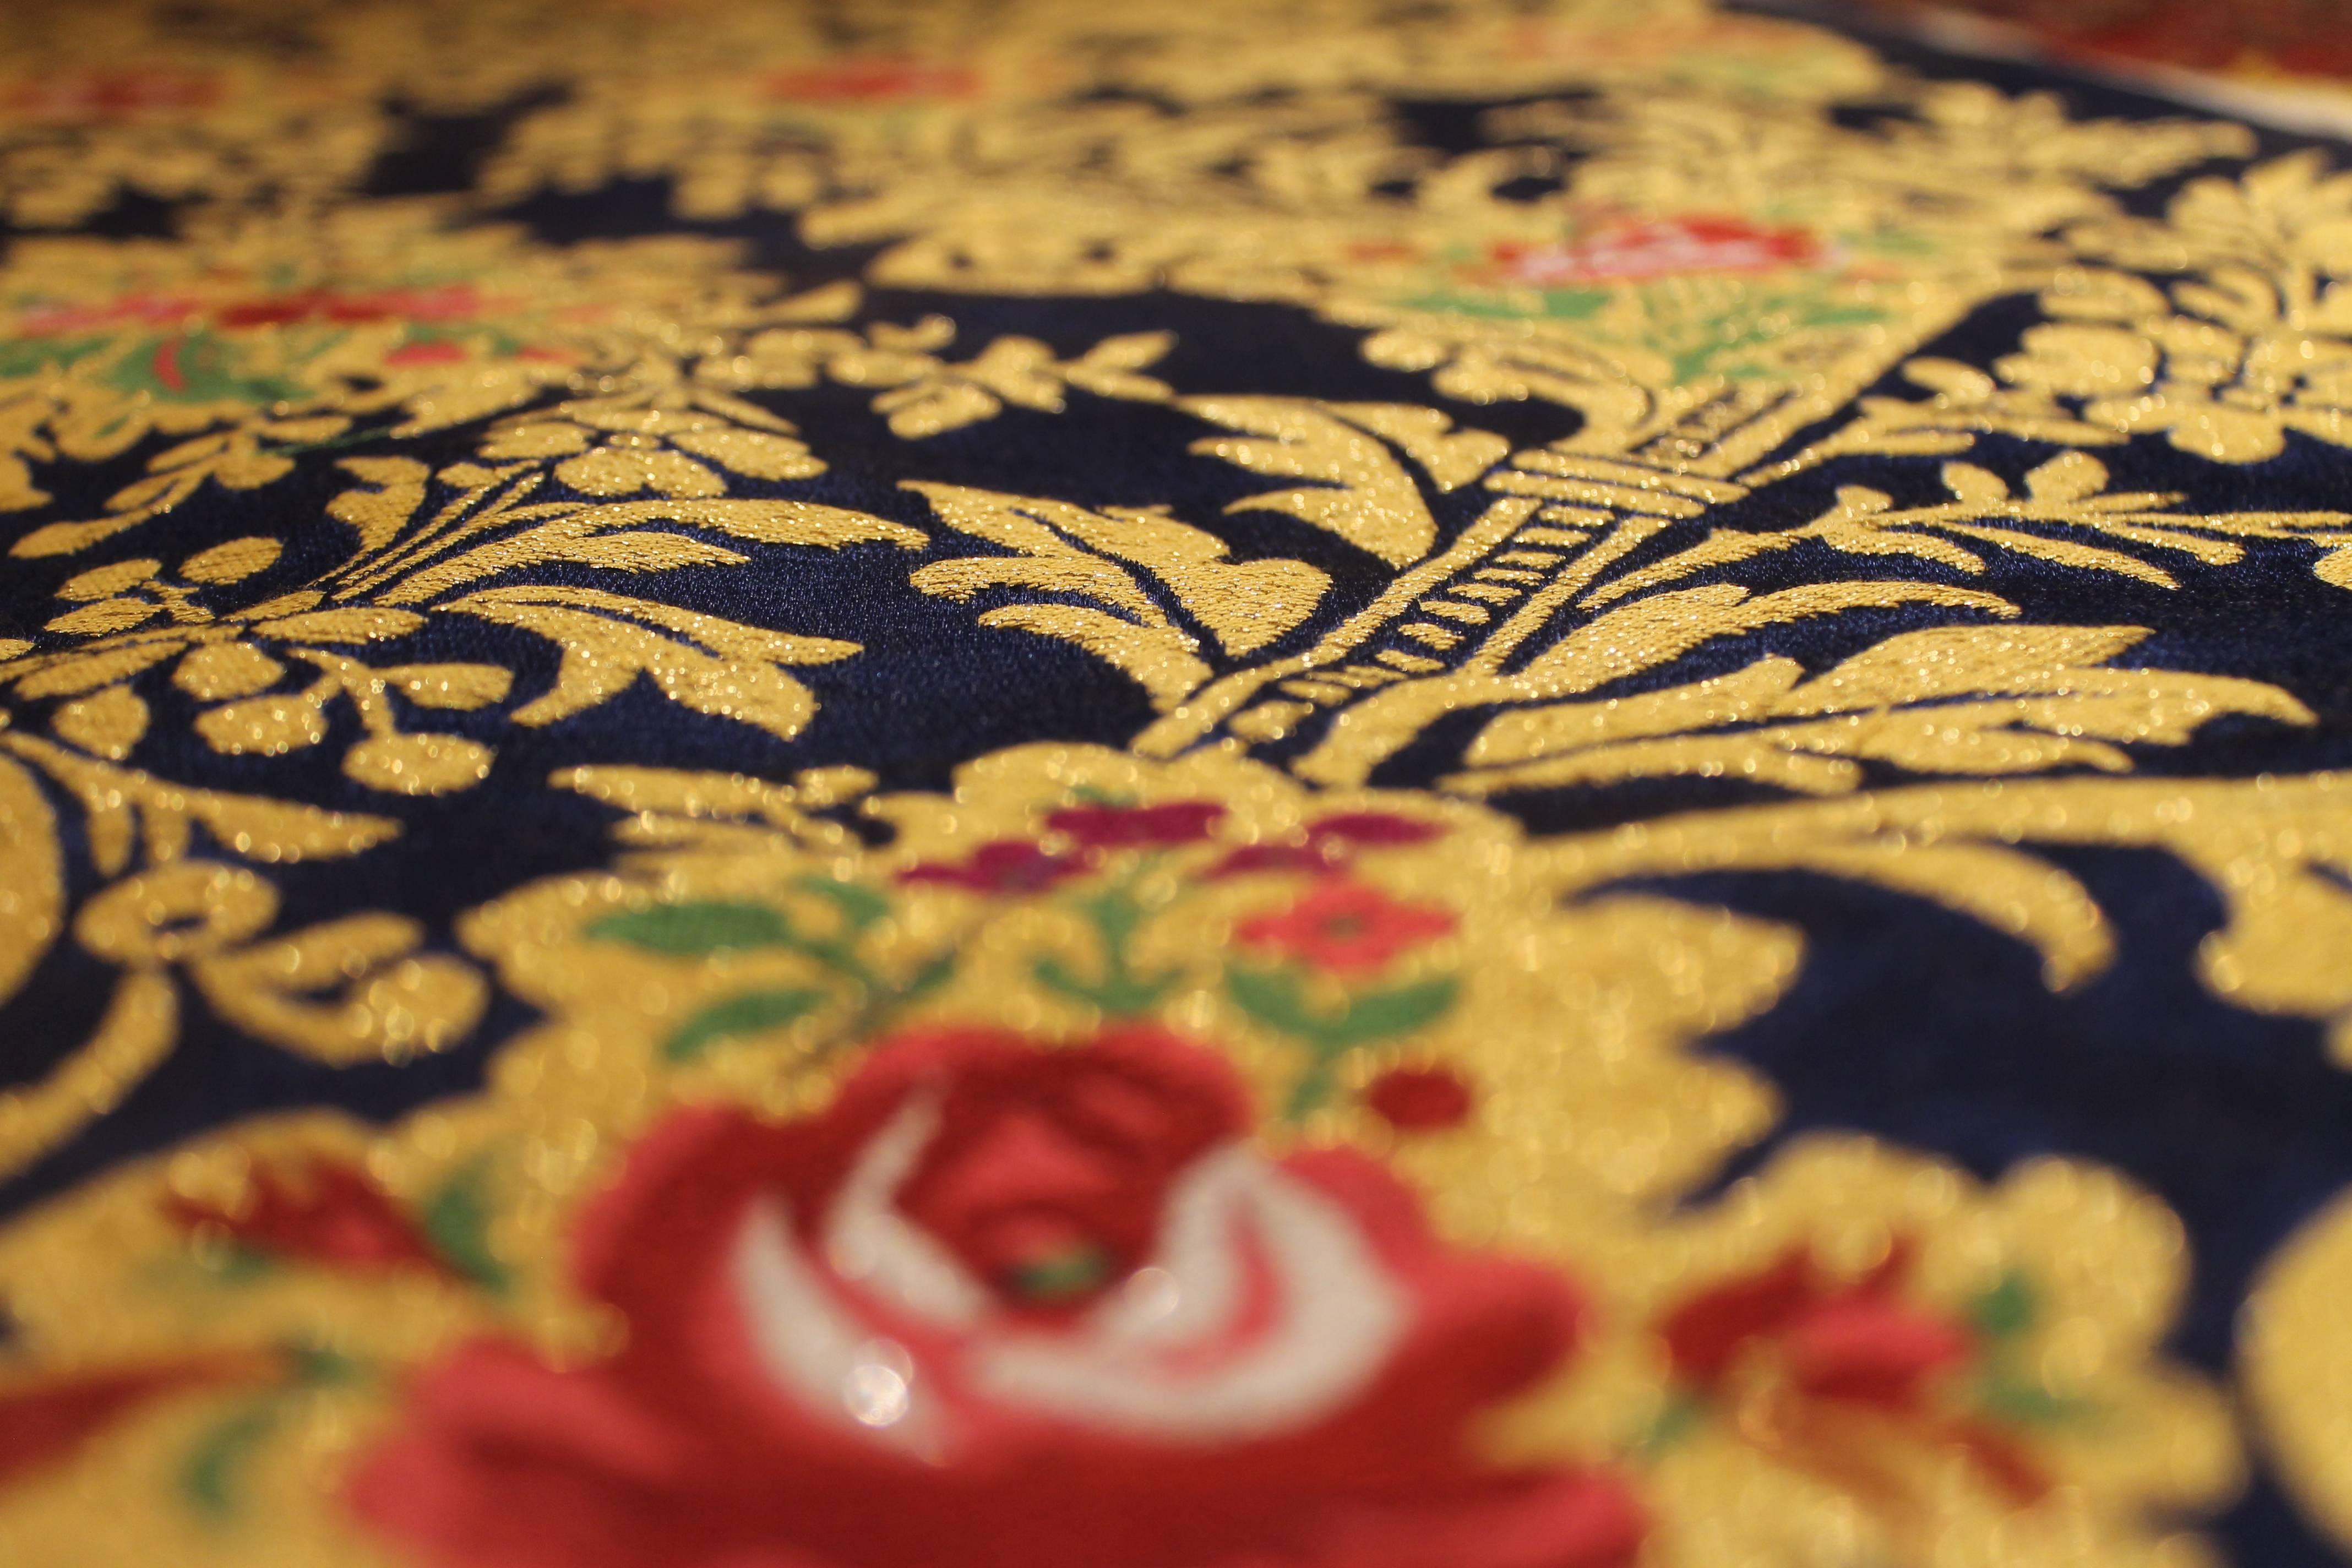 Italian Green Silk Blend Brocade Fabric with Red Roses and Gold Floral Patterns For Sale 2